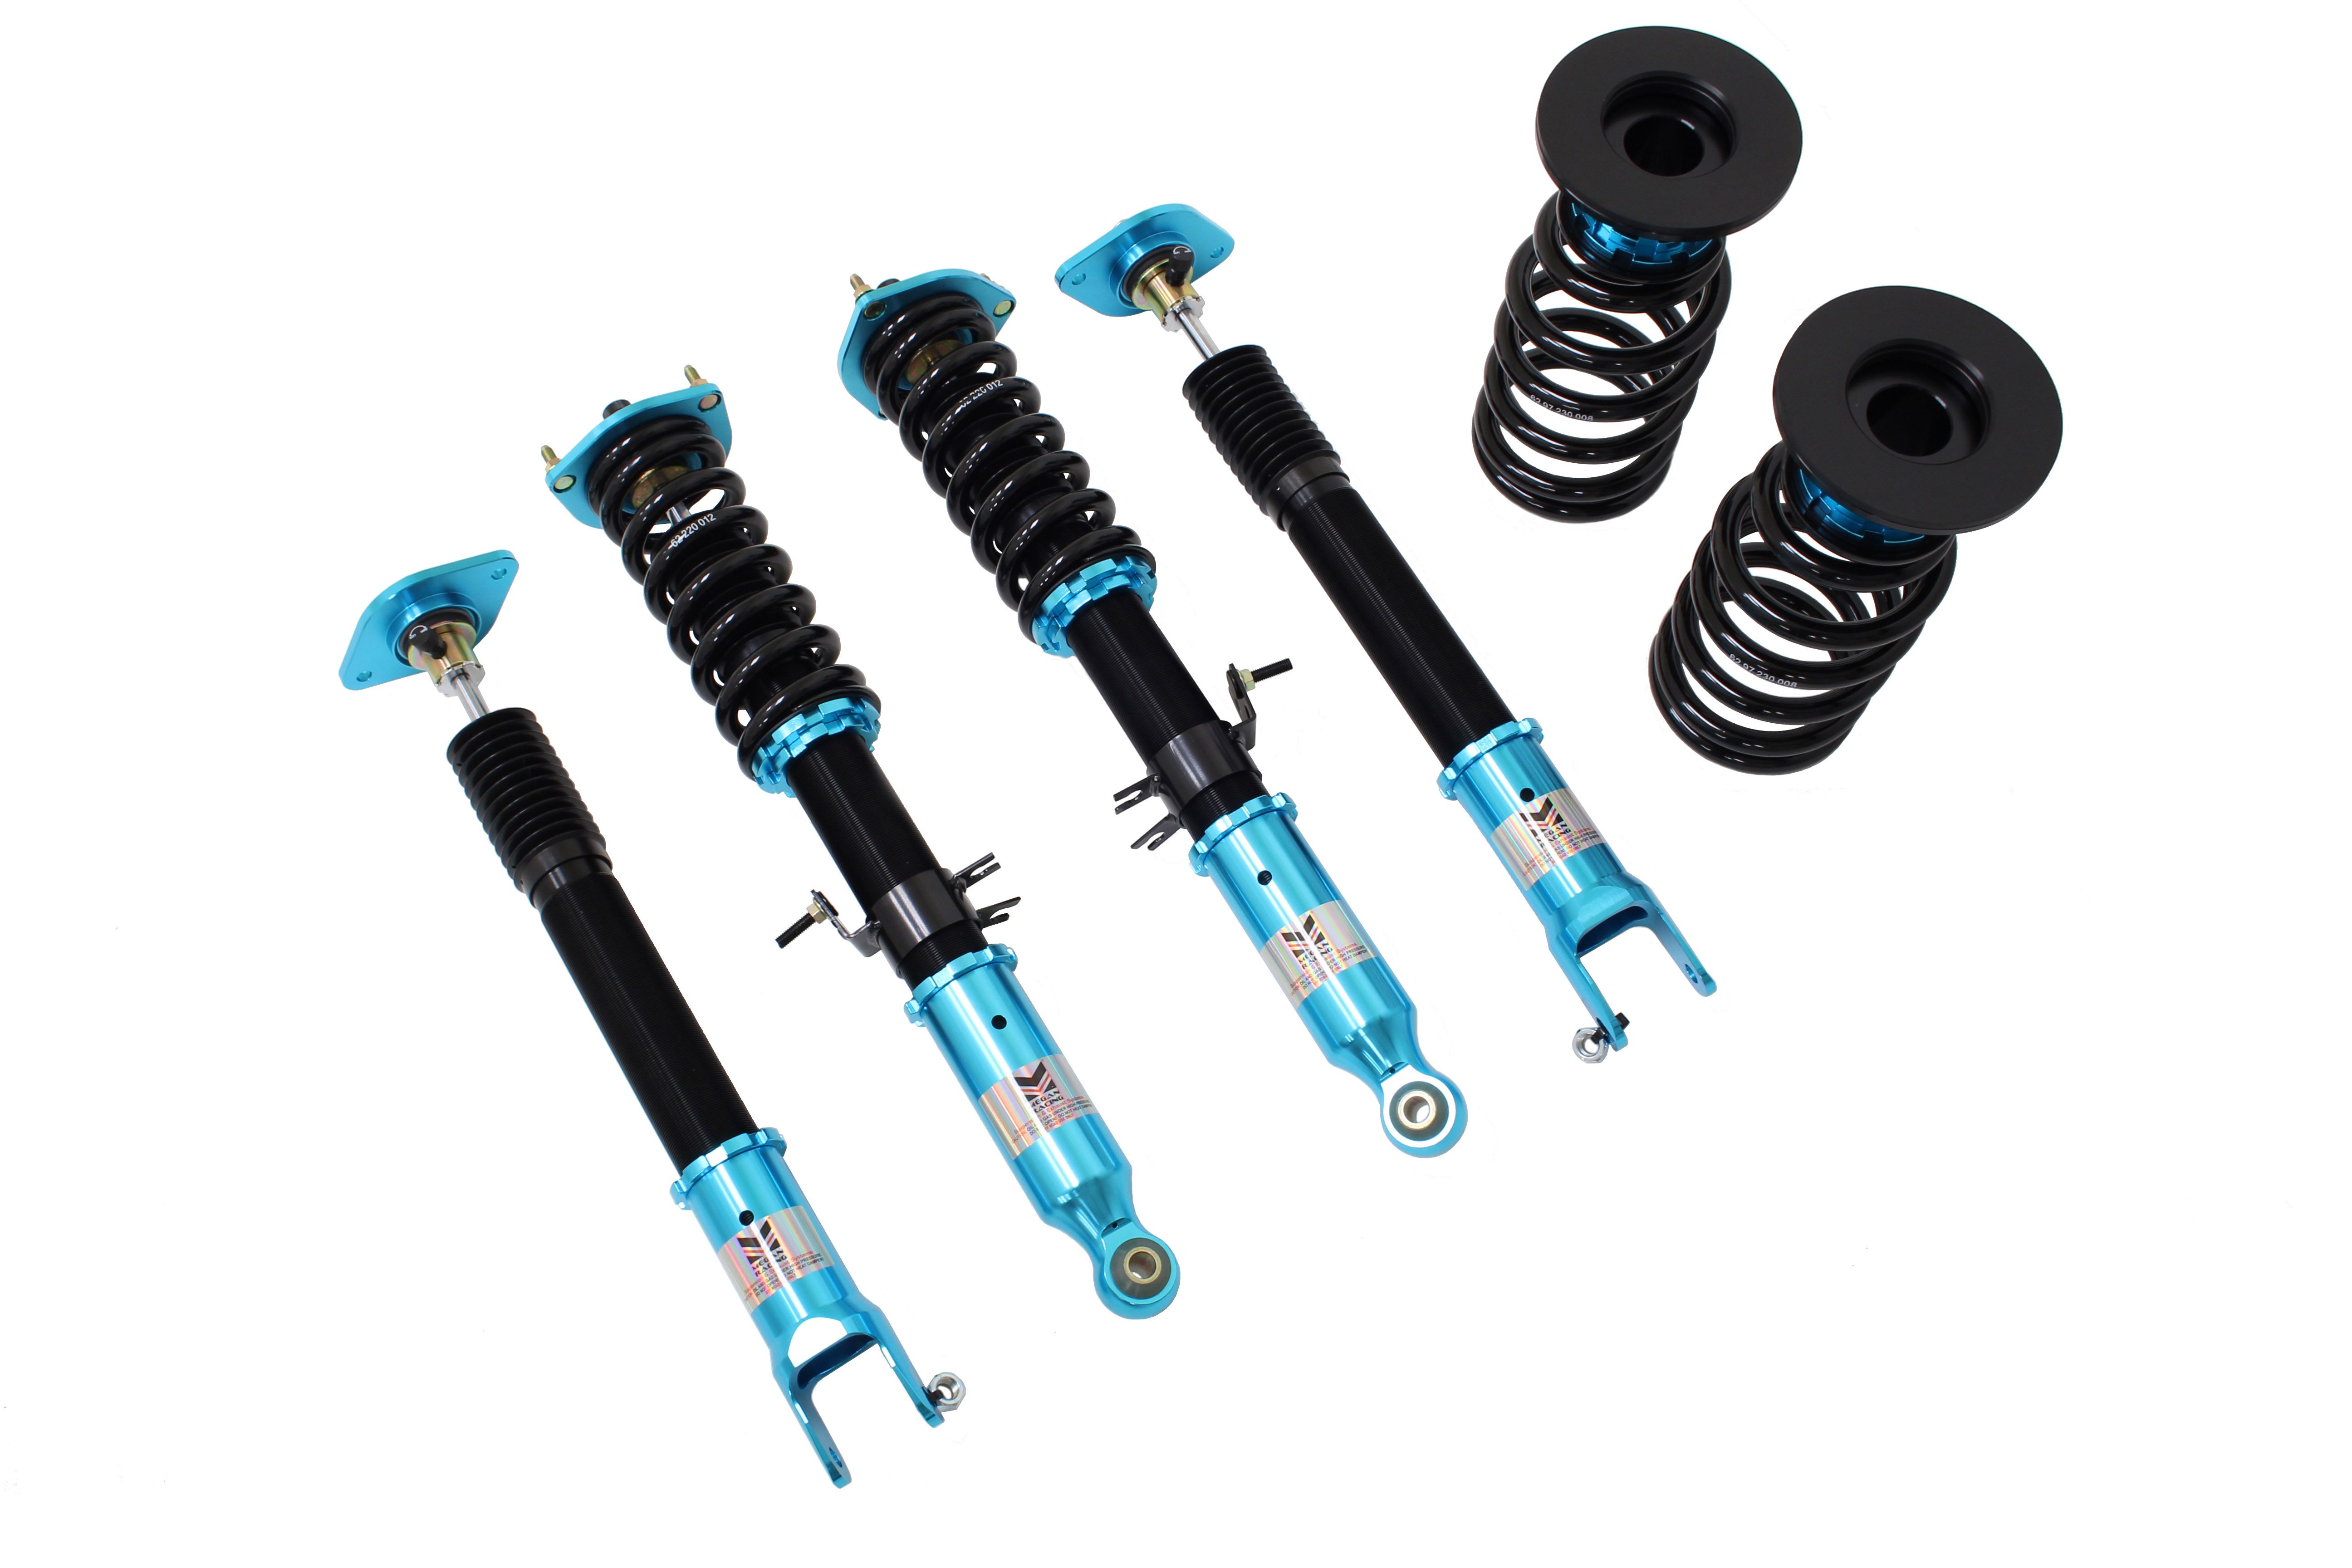 Coilovers Kits For Infiniti G35x 03-08 AWD for G37x 08-13 AWD Adj Damper upgrade